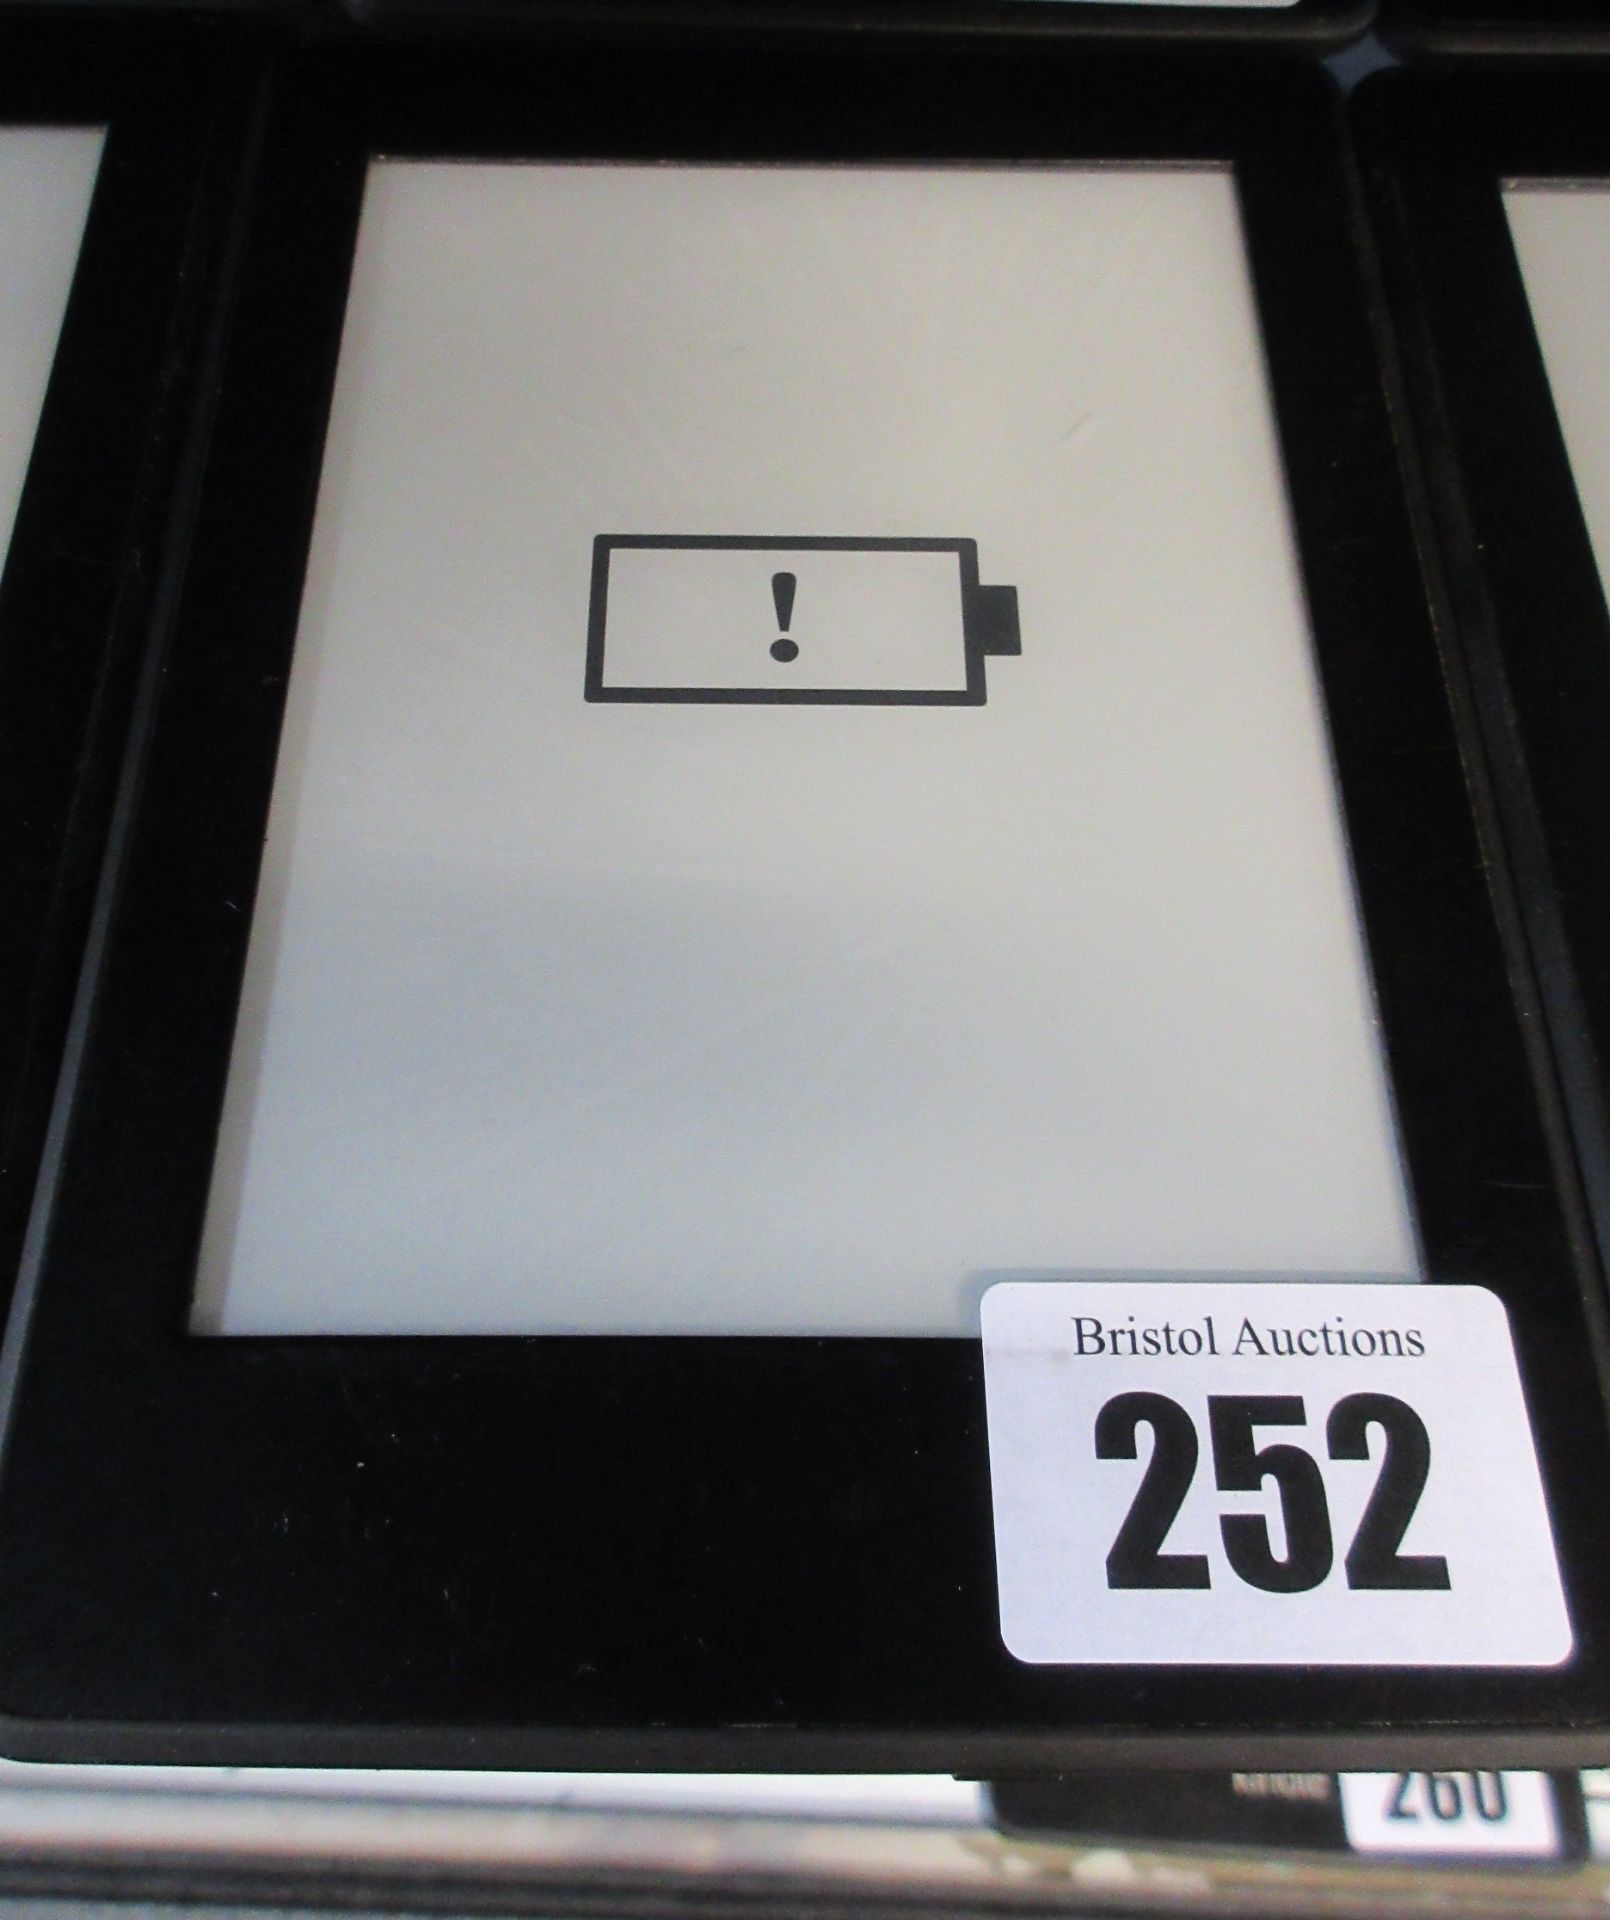 A pre-owned Amazon Kindle Paperwhite (DP75SDI) 6” E-Reader in Black (Small amount of damage to